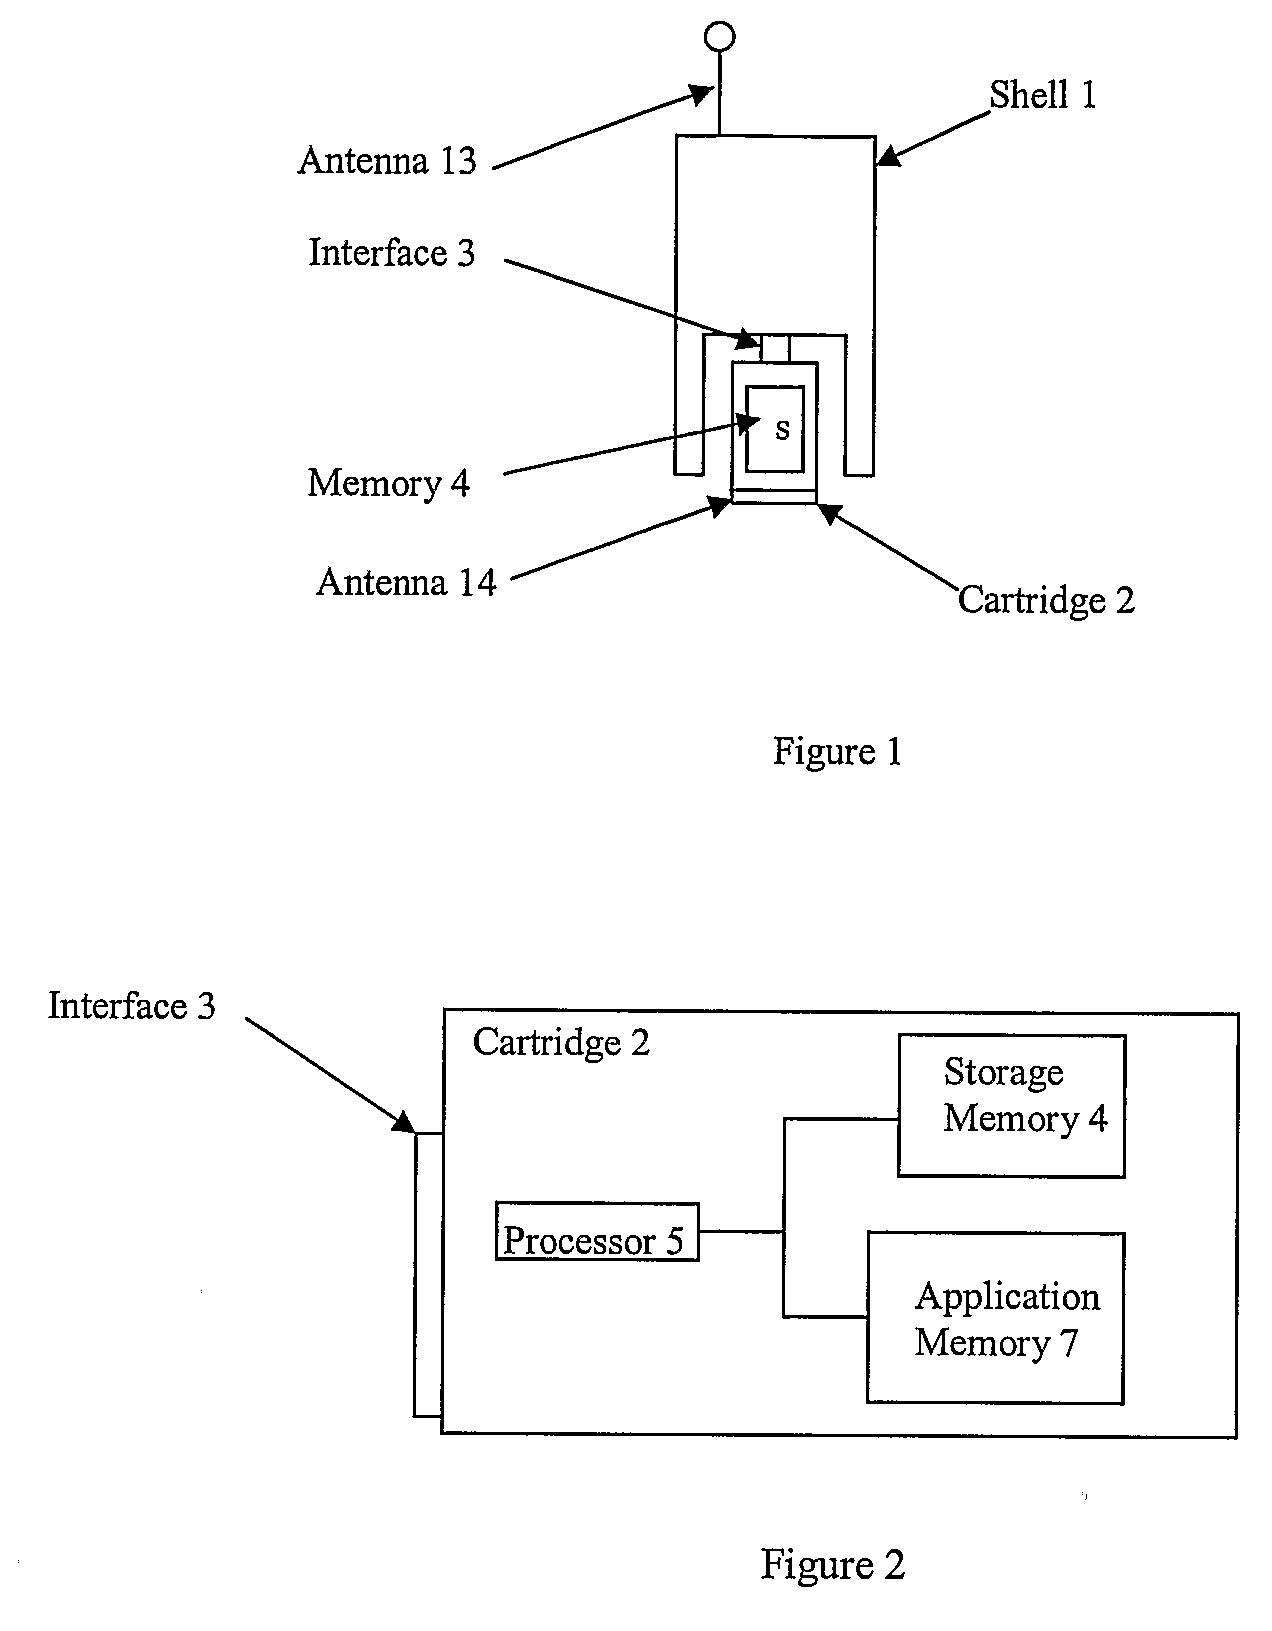 Apparatus for a Removable Wireless Module With Storage Memory